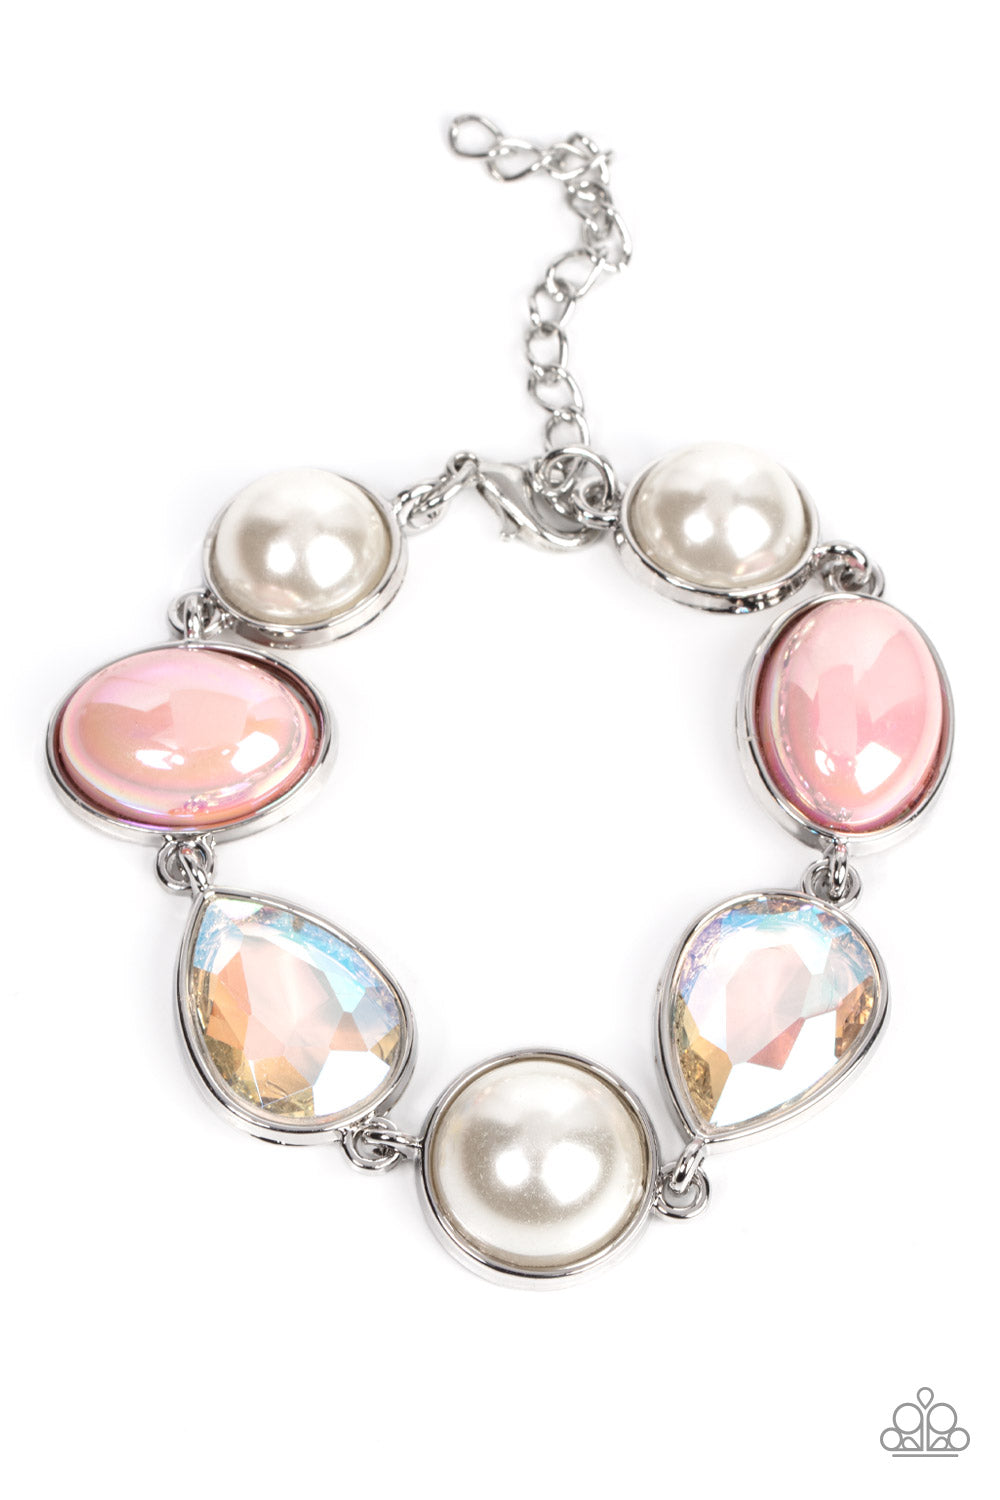 collection of classic white pearls, iridescent Pale Rosette beads, and iridescent crystal-like teardrops wrap around the wrist 